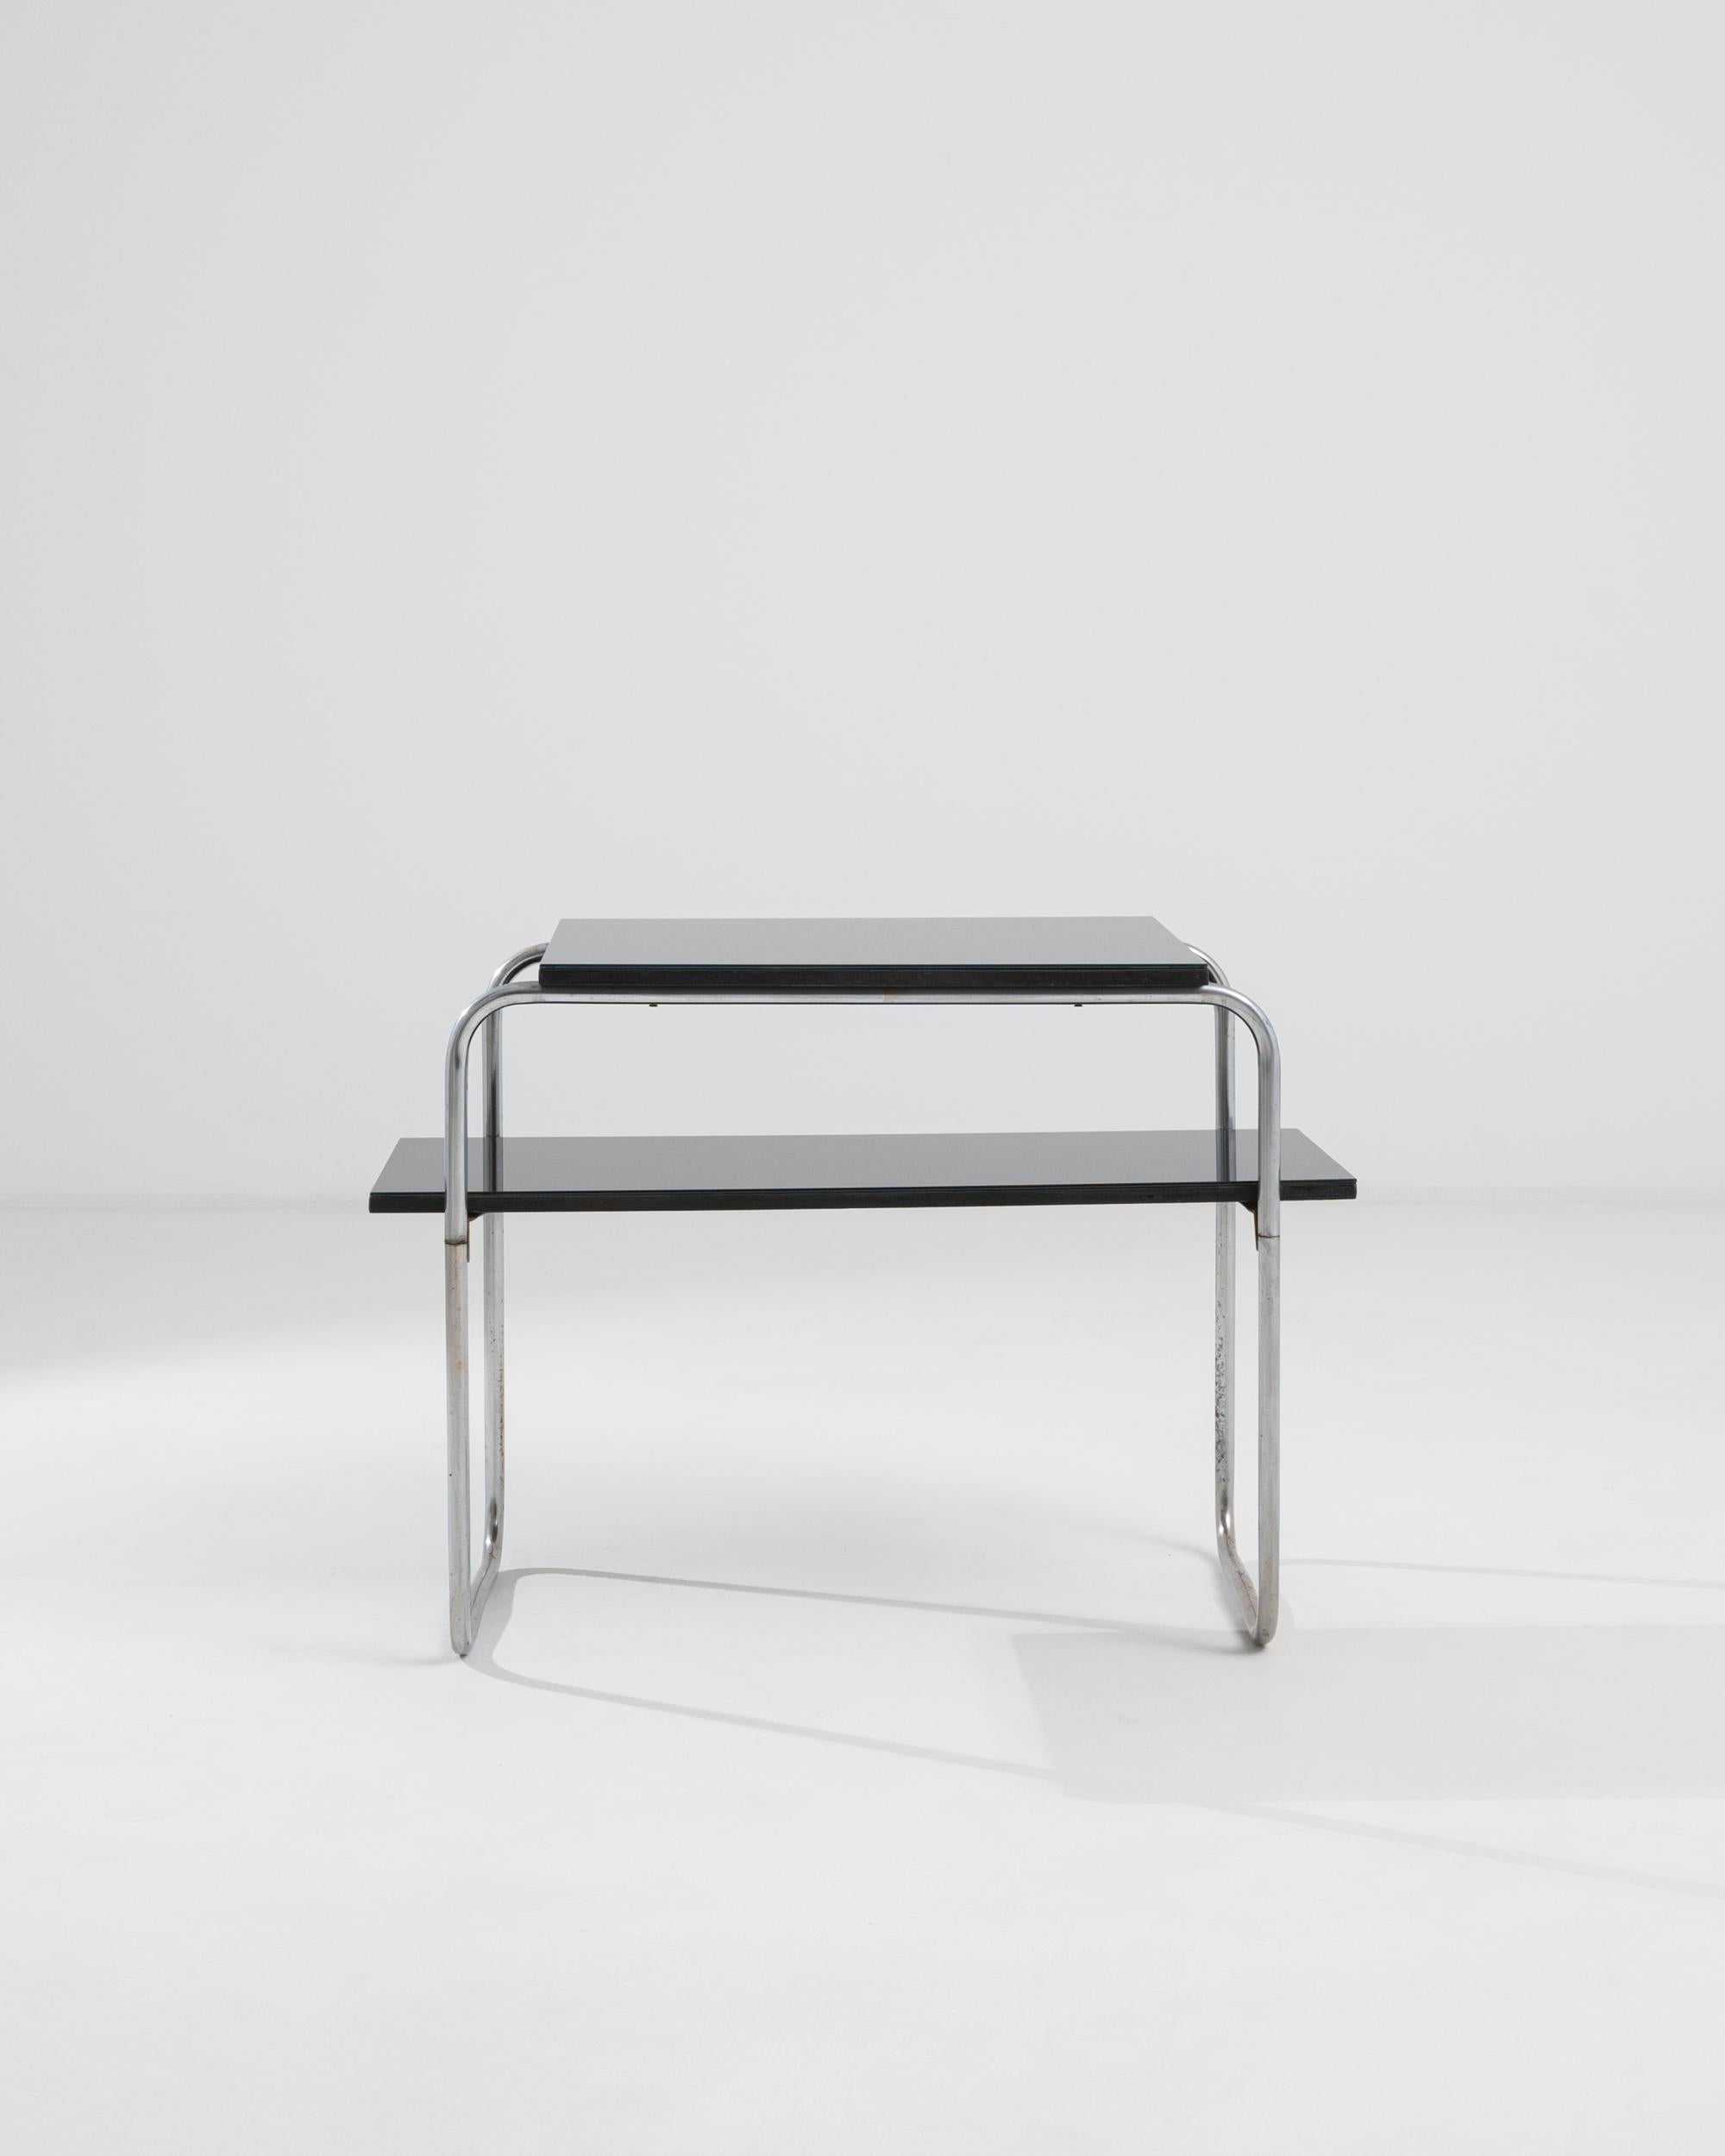 A side table made from wood, glass and metal from 20th century Czechia. This side table is composed of a simple, yet satisfying construction. Hollow metal twists this way and then that to two support its two gleaming shelves. Its materials and